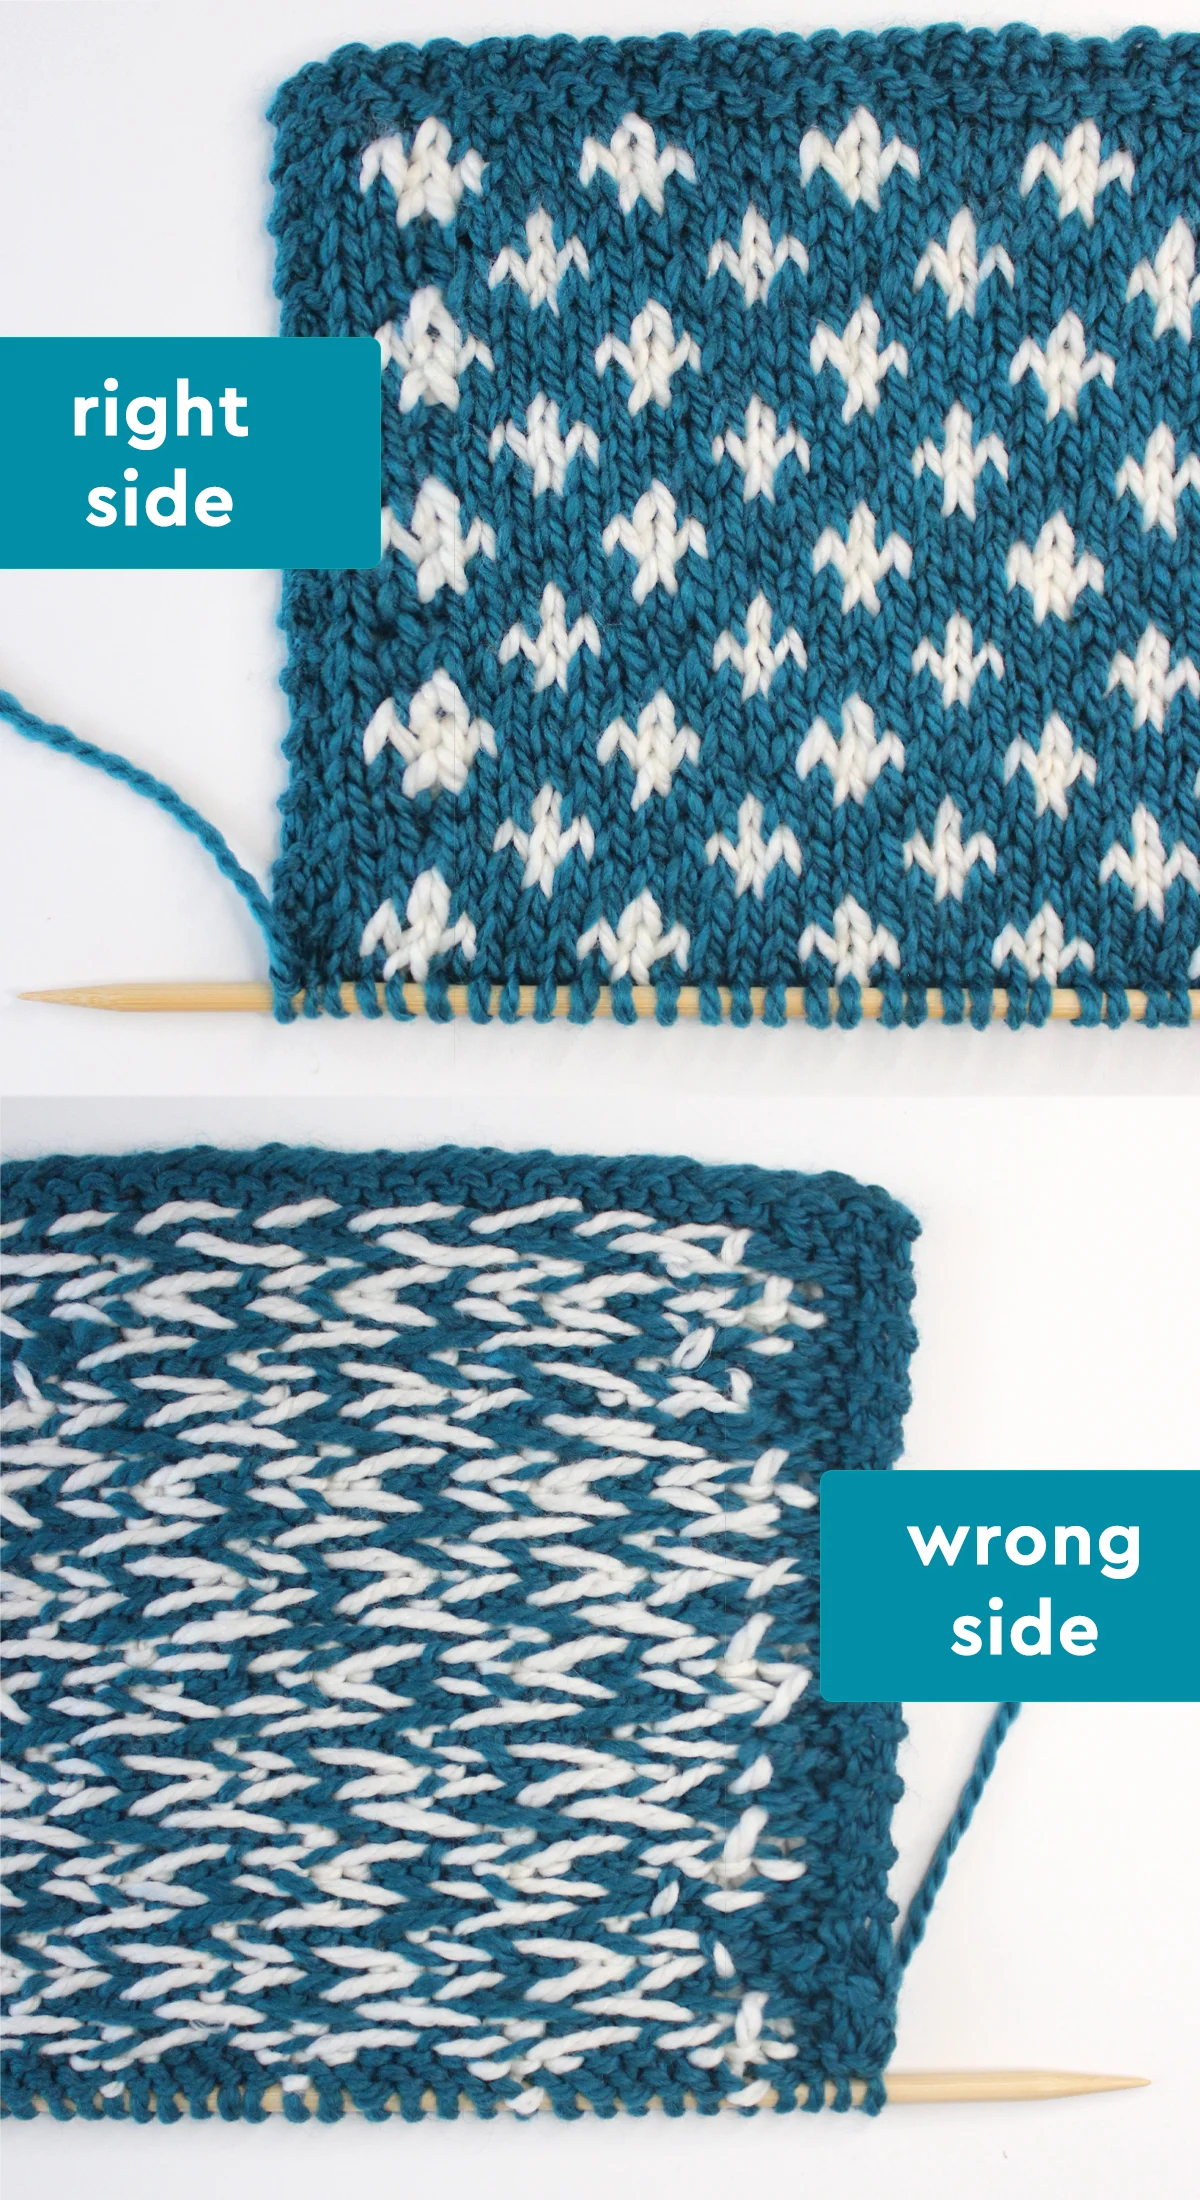 Right and Wrong sides of the Fleur de Lys knit stitch pattern in blue and white color yarn on knitting needle.